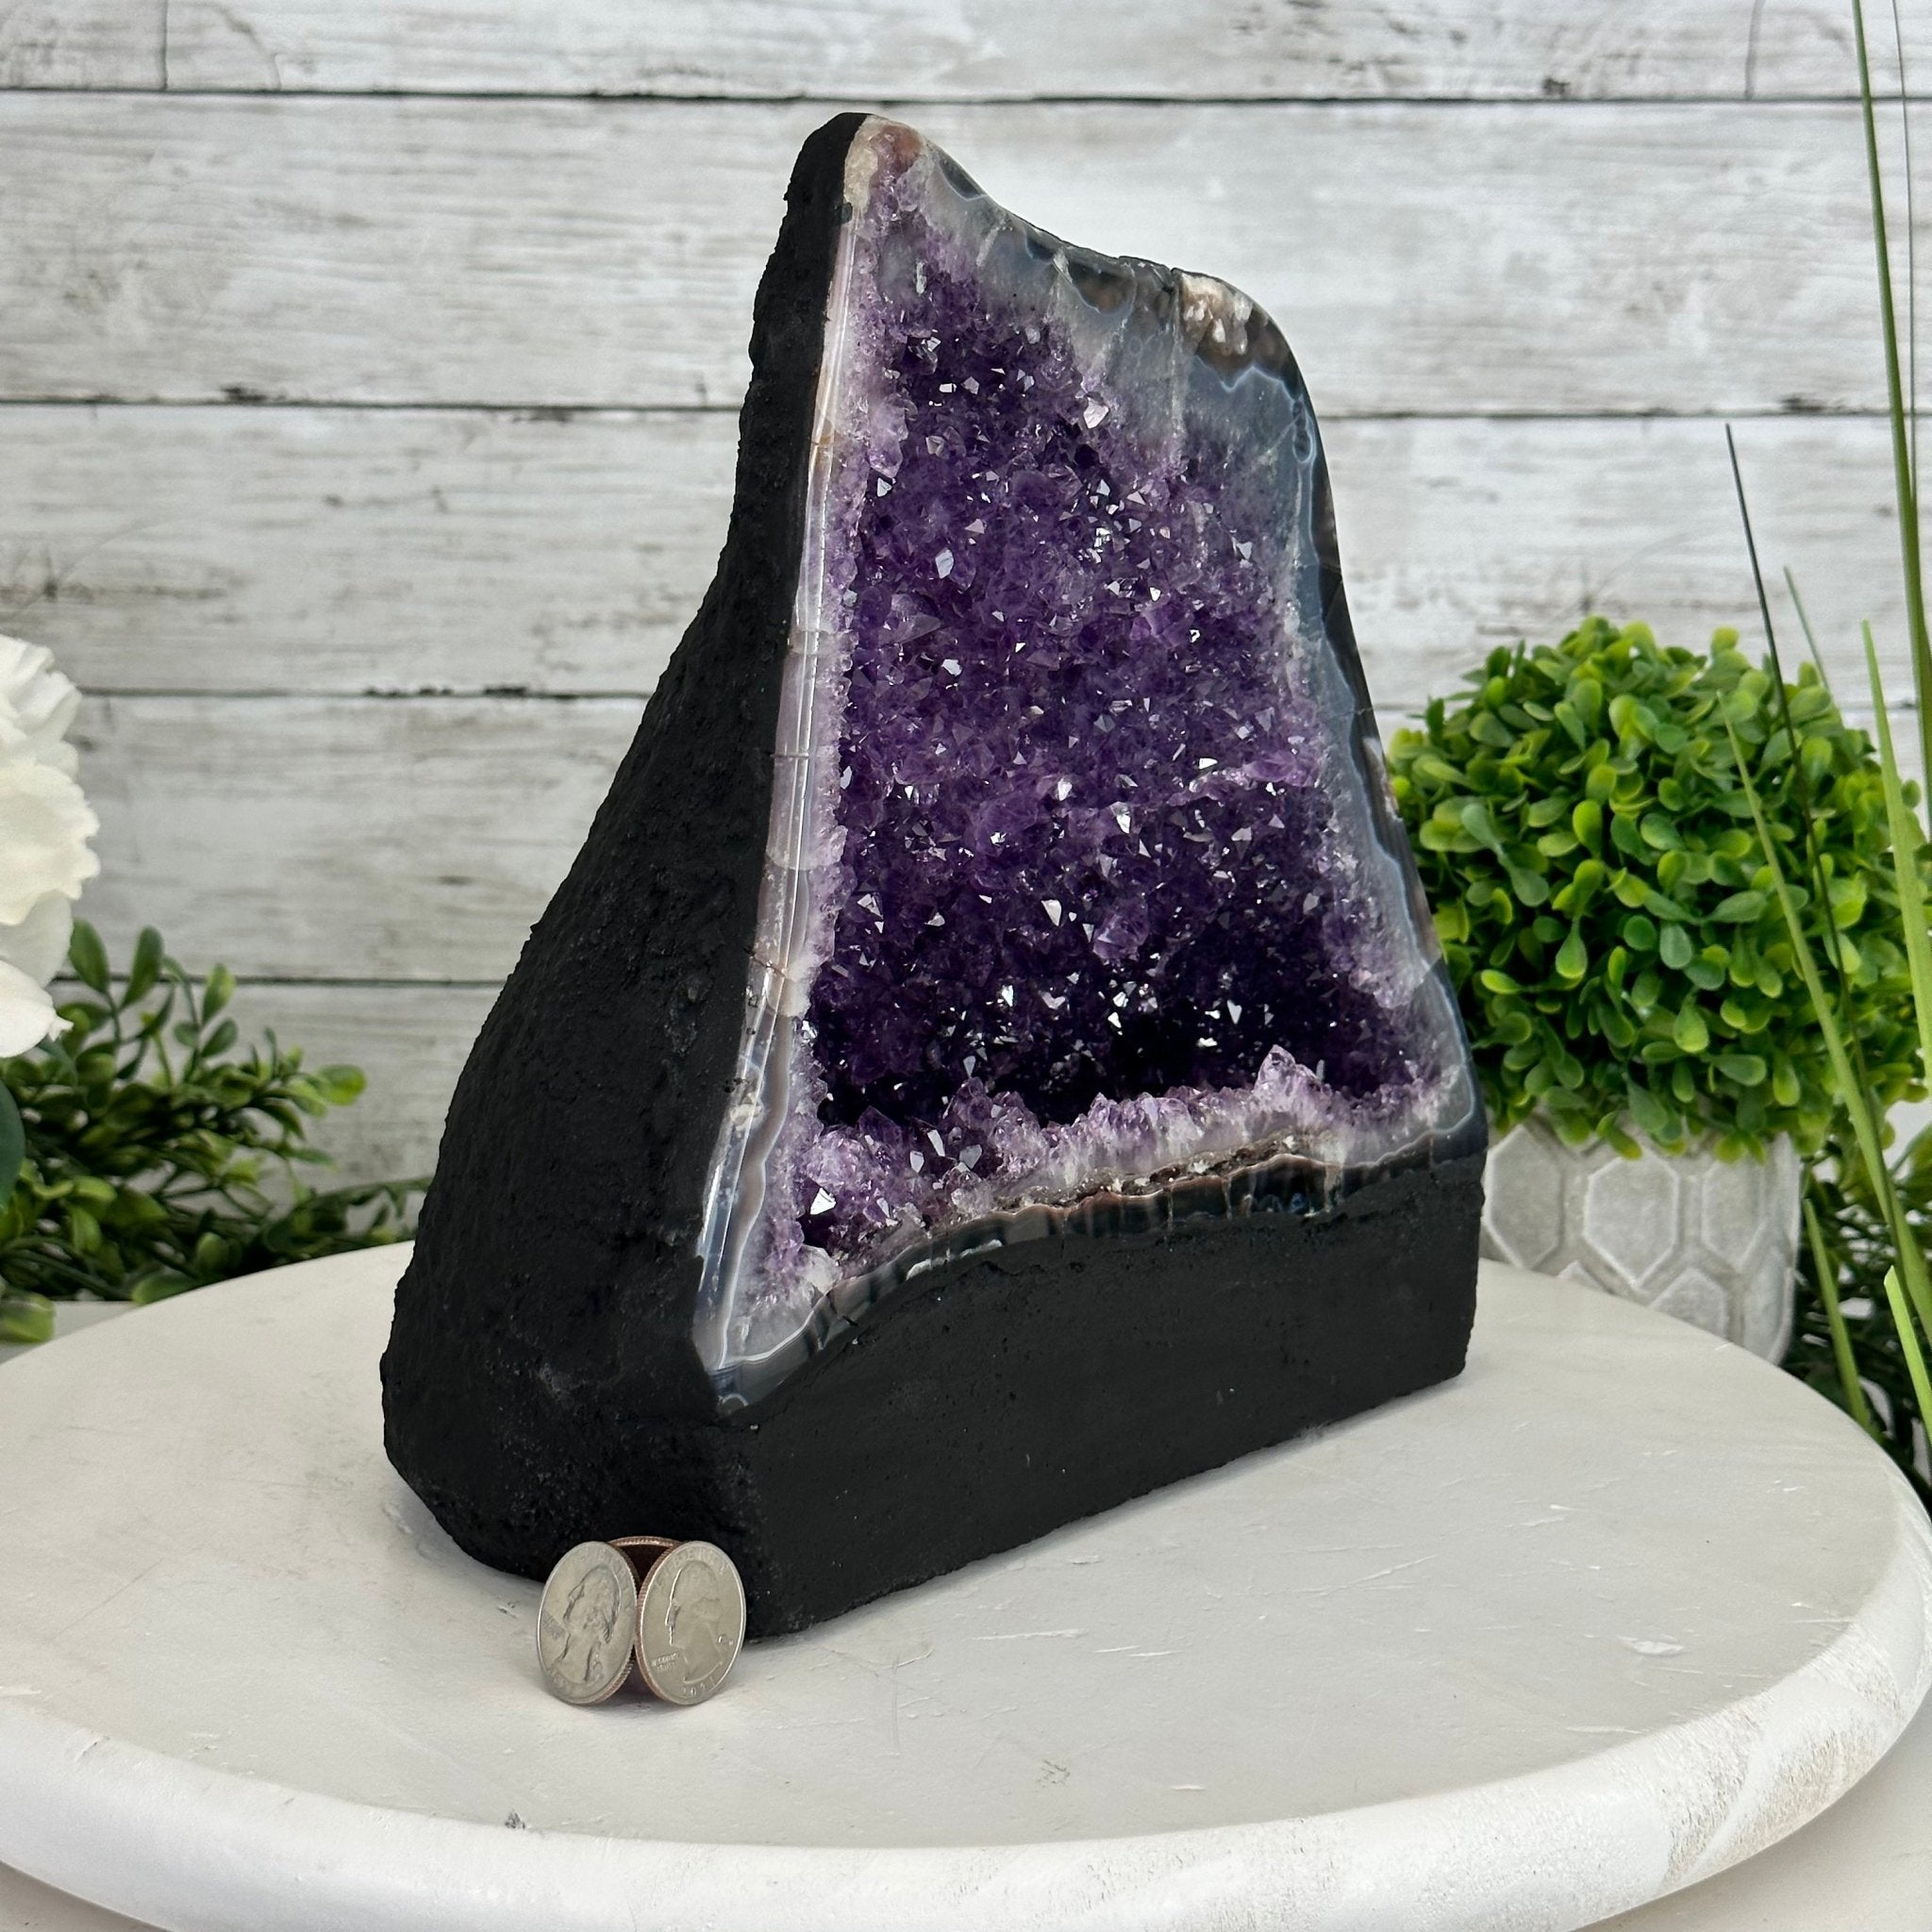 Extra Plus Quality Brazilian Amethyst Cathedral, 12.1 lbs & 9.25" Tall, Model #5601-1061 by Brazil Gems - Brazil GemsBrazil GemsExtra Plus Quality Brazilian Amethyst Cathedral, 12.1 lbs & 9.25" Tall, Model #5601-1061 by Brazil GemsCathedrals5601-1061